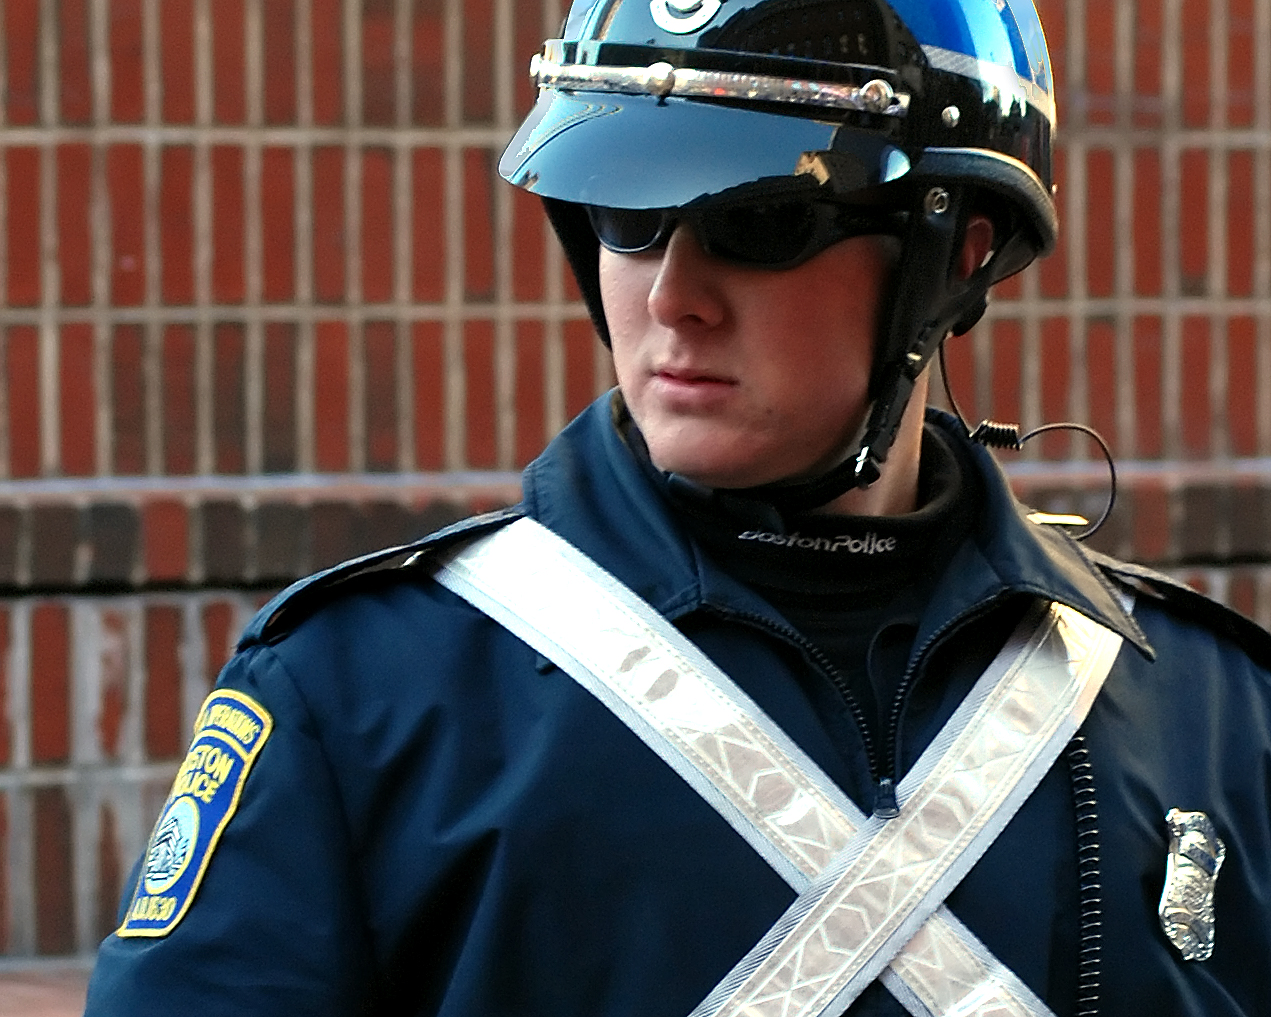 Boston Police Special Operations Officer